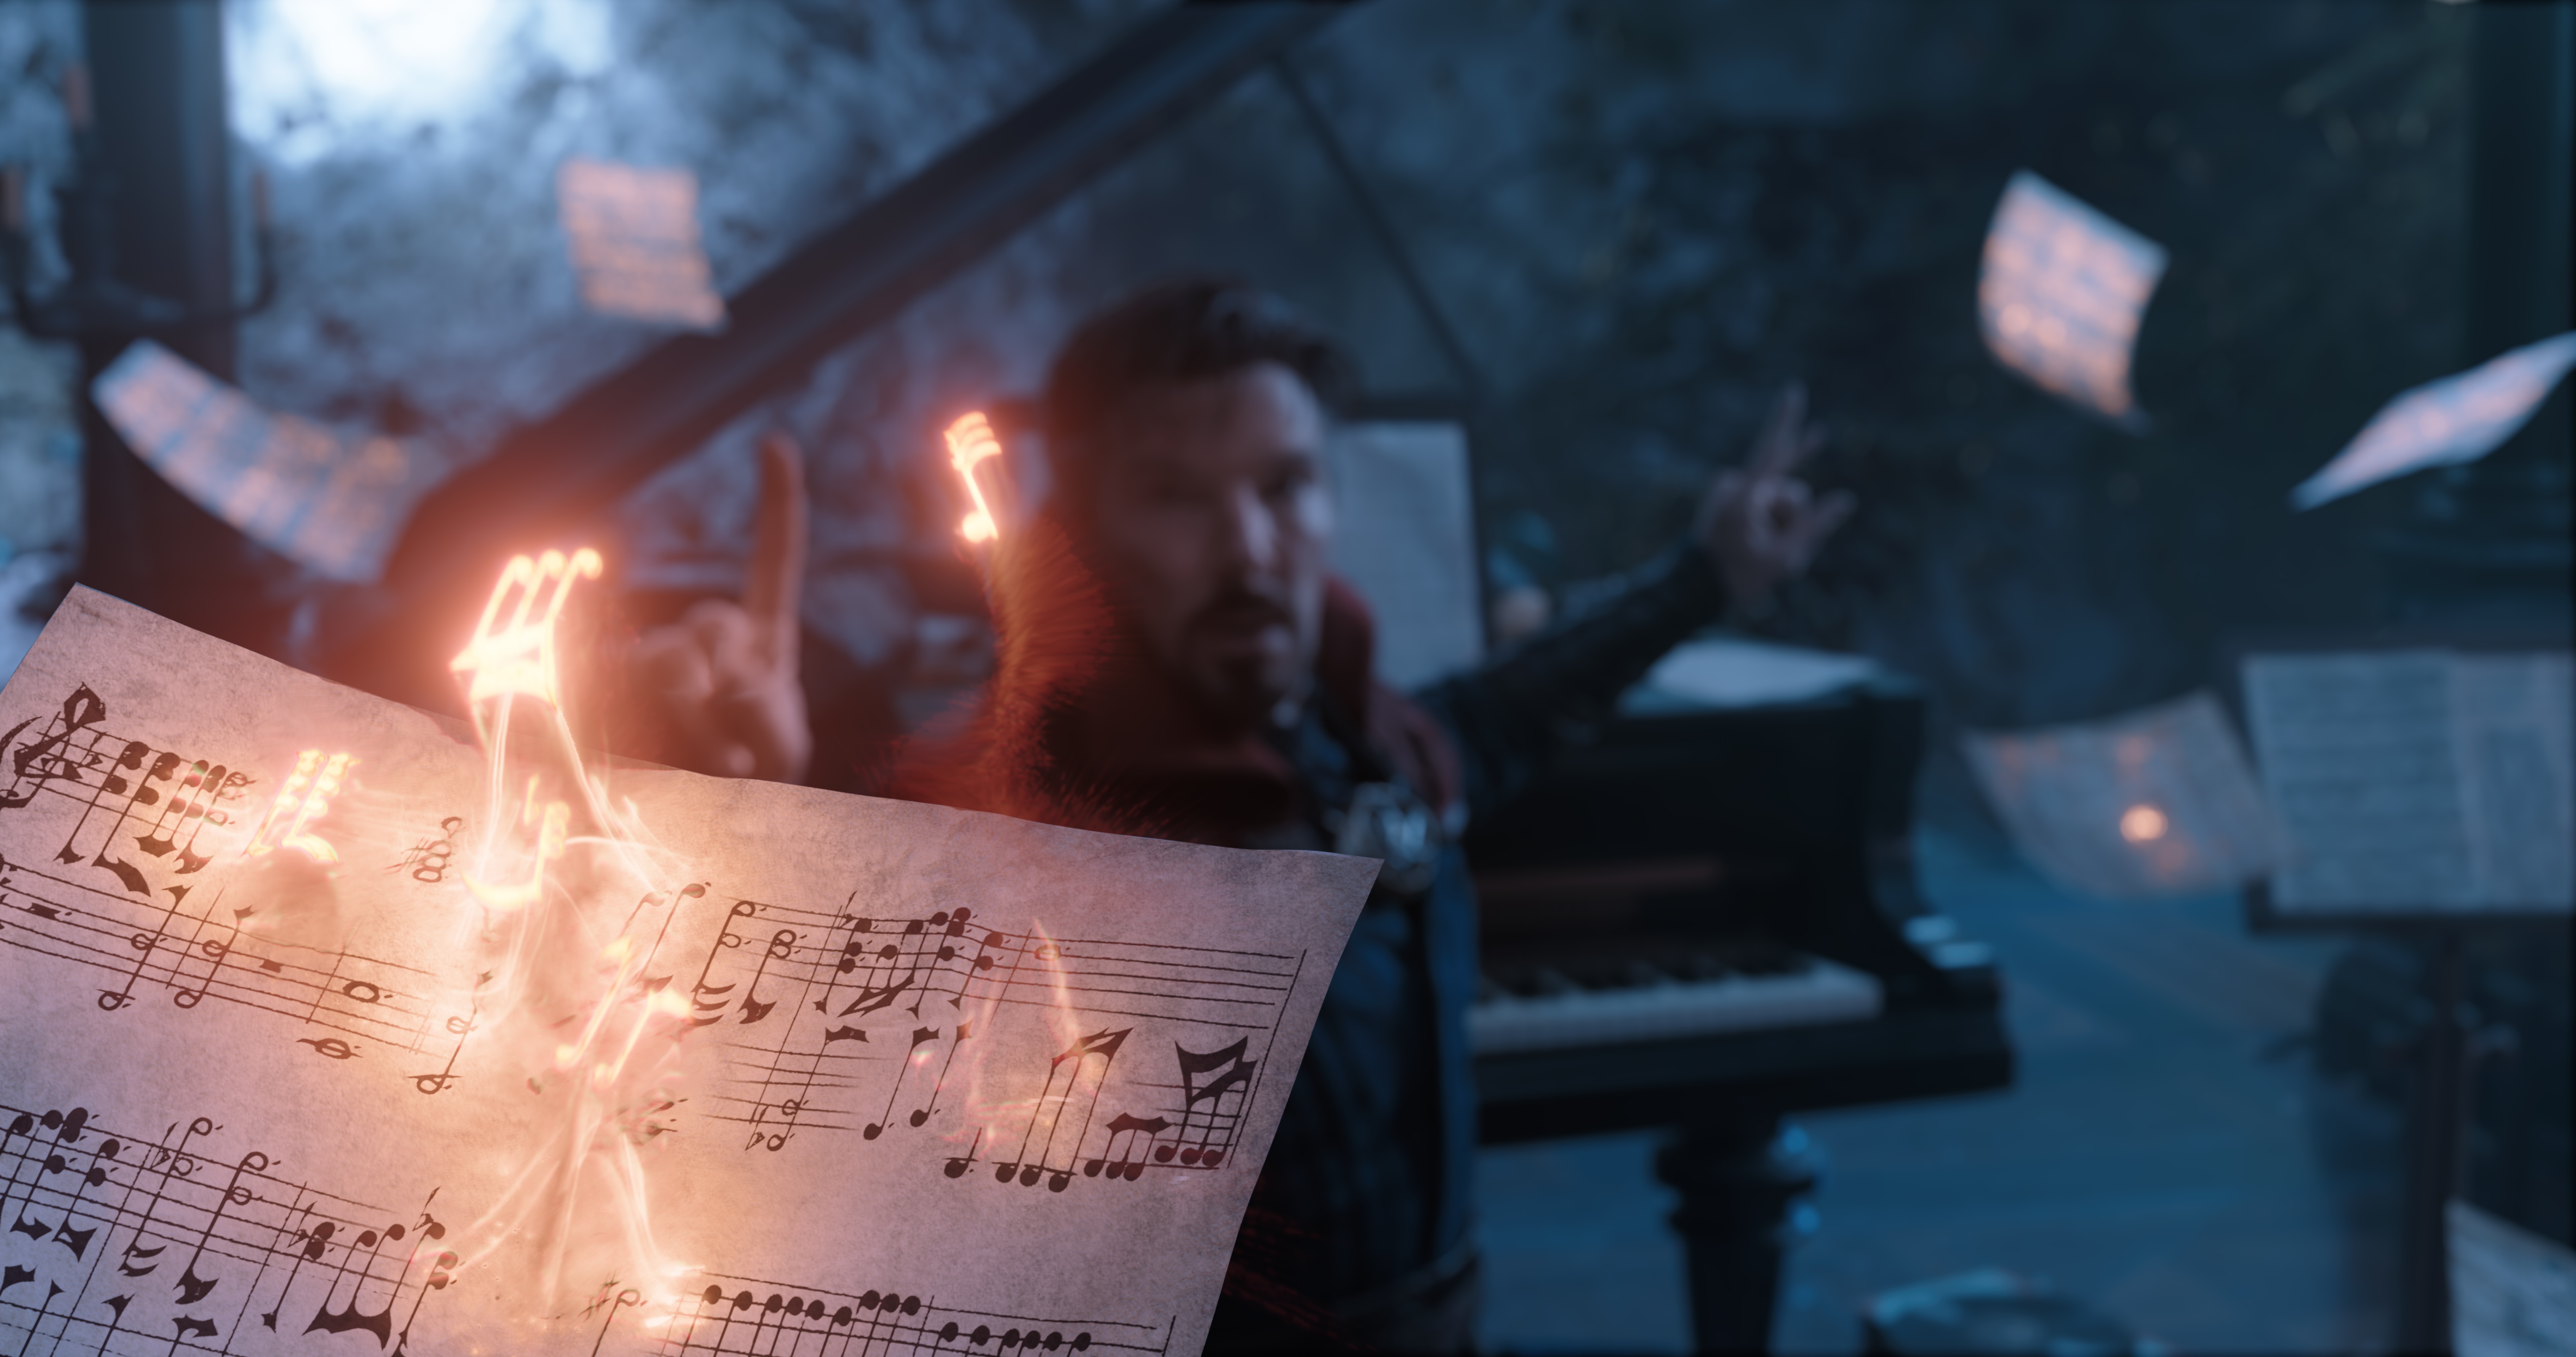 Doctor Strange casts a spell, pulling glowing music notes off of a music sheet.